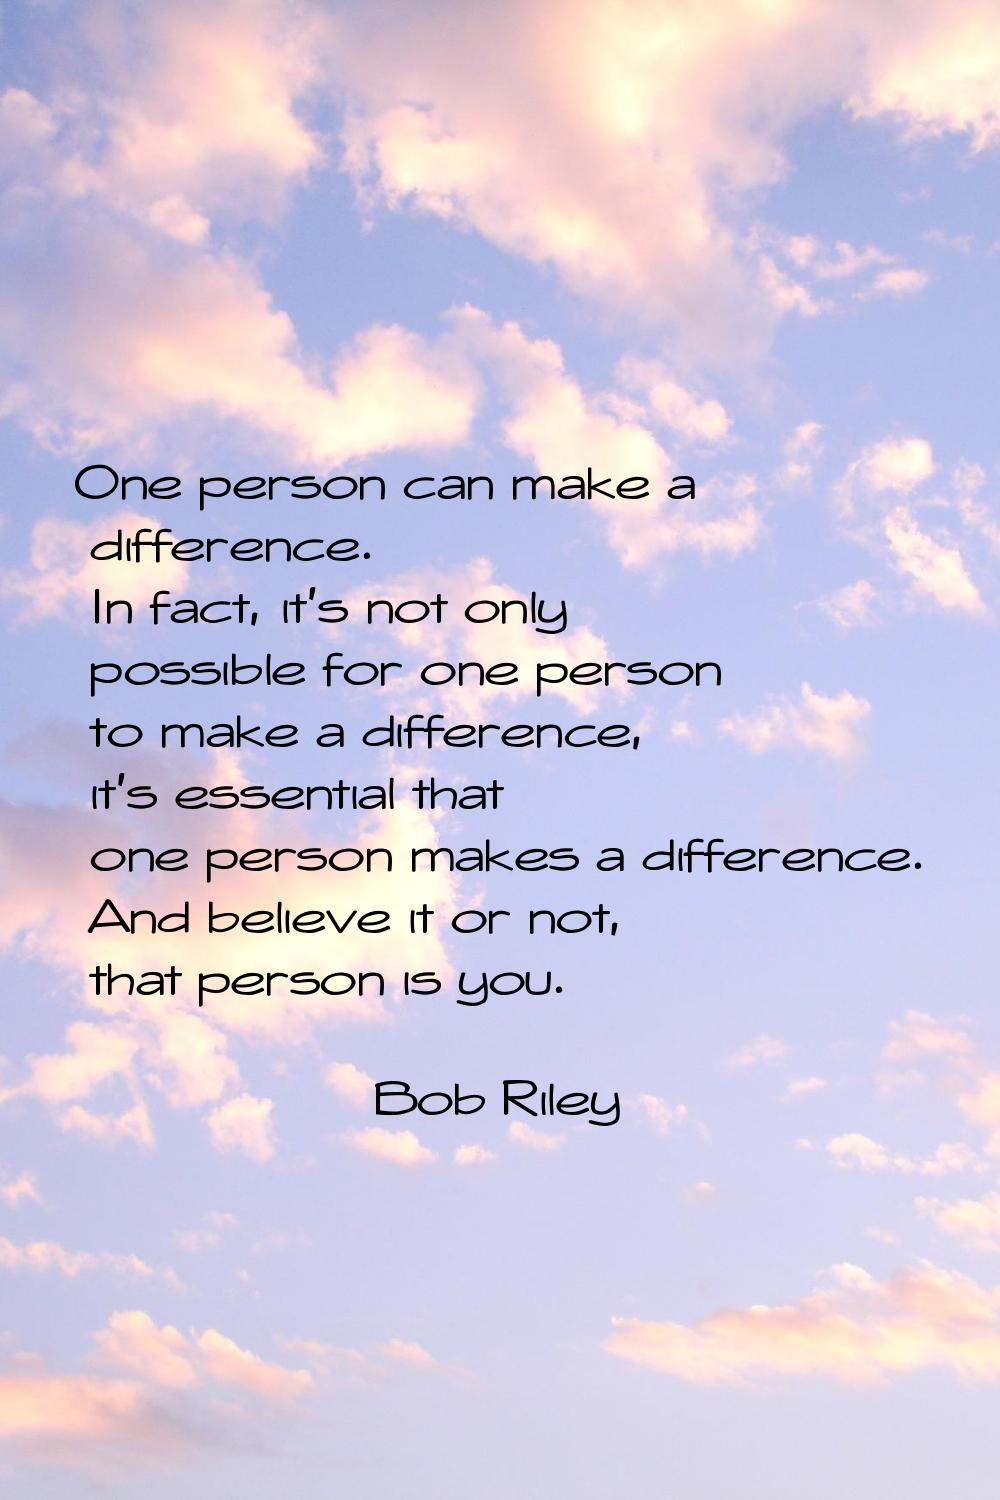 One person can make a difference. In fact, it's not only possible for one person to make a differen